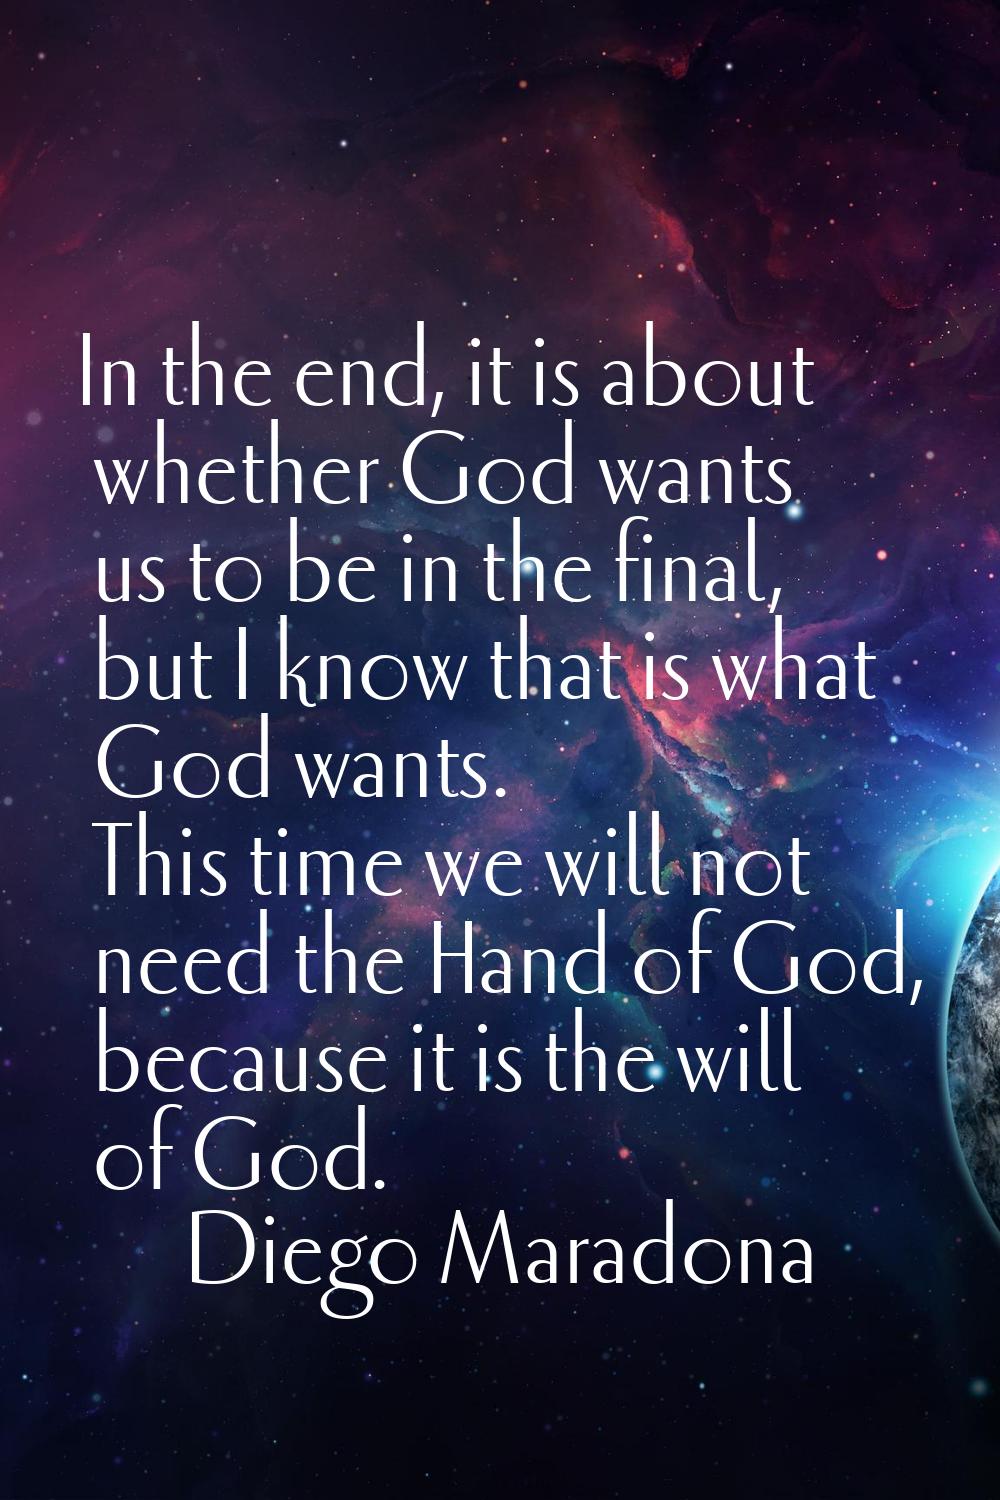 In the end, it is about whether God wants us to be in the final, but I know that is what God wants.